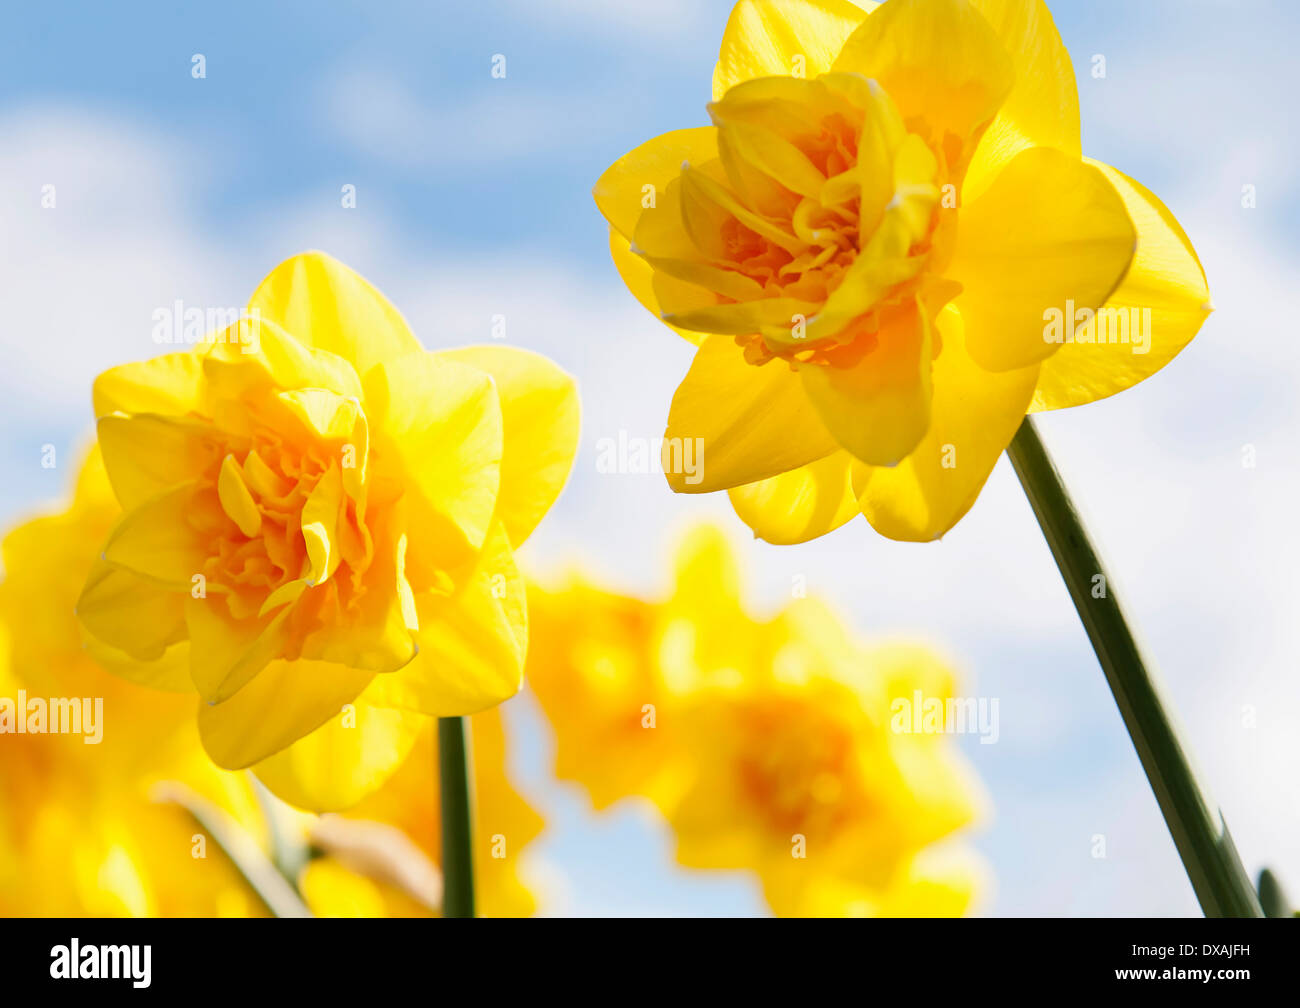 Daffodil 'Jack the Lad', Narcissus 'Jack the Lad', yellow flowers growing outdoors against a blue sky. Stock Photo